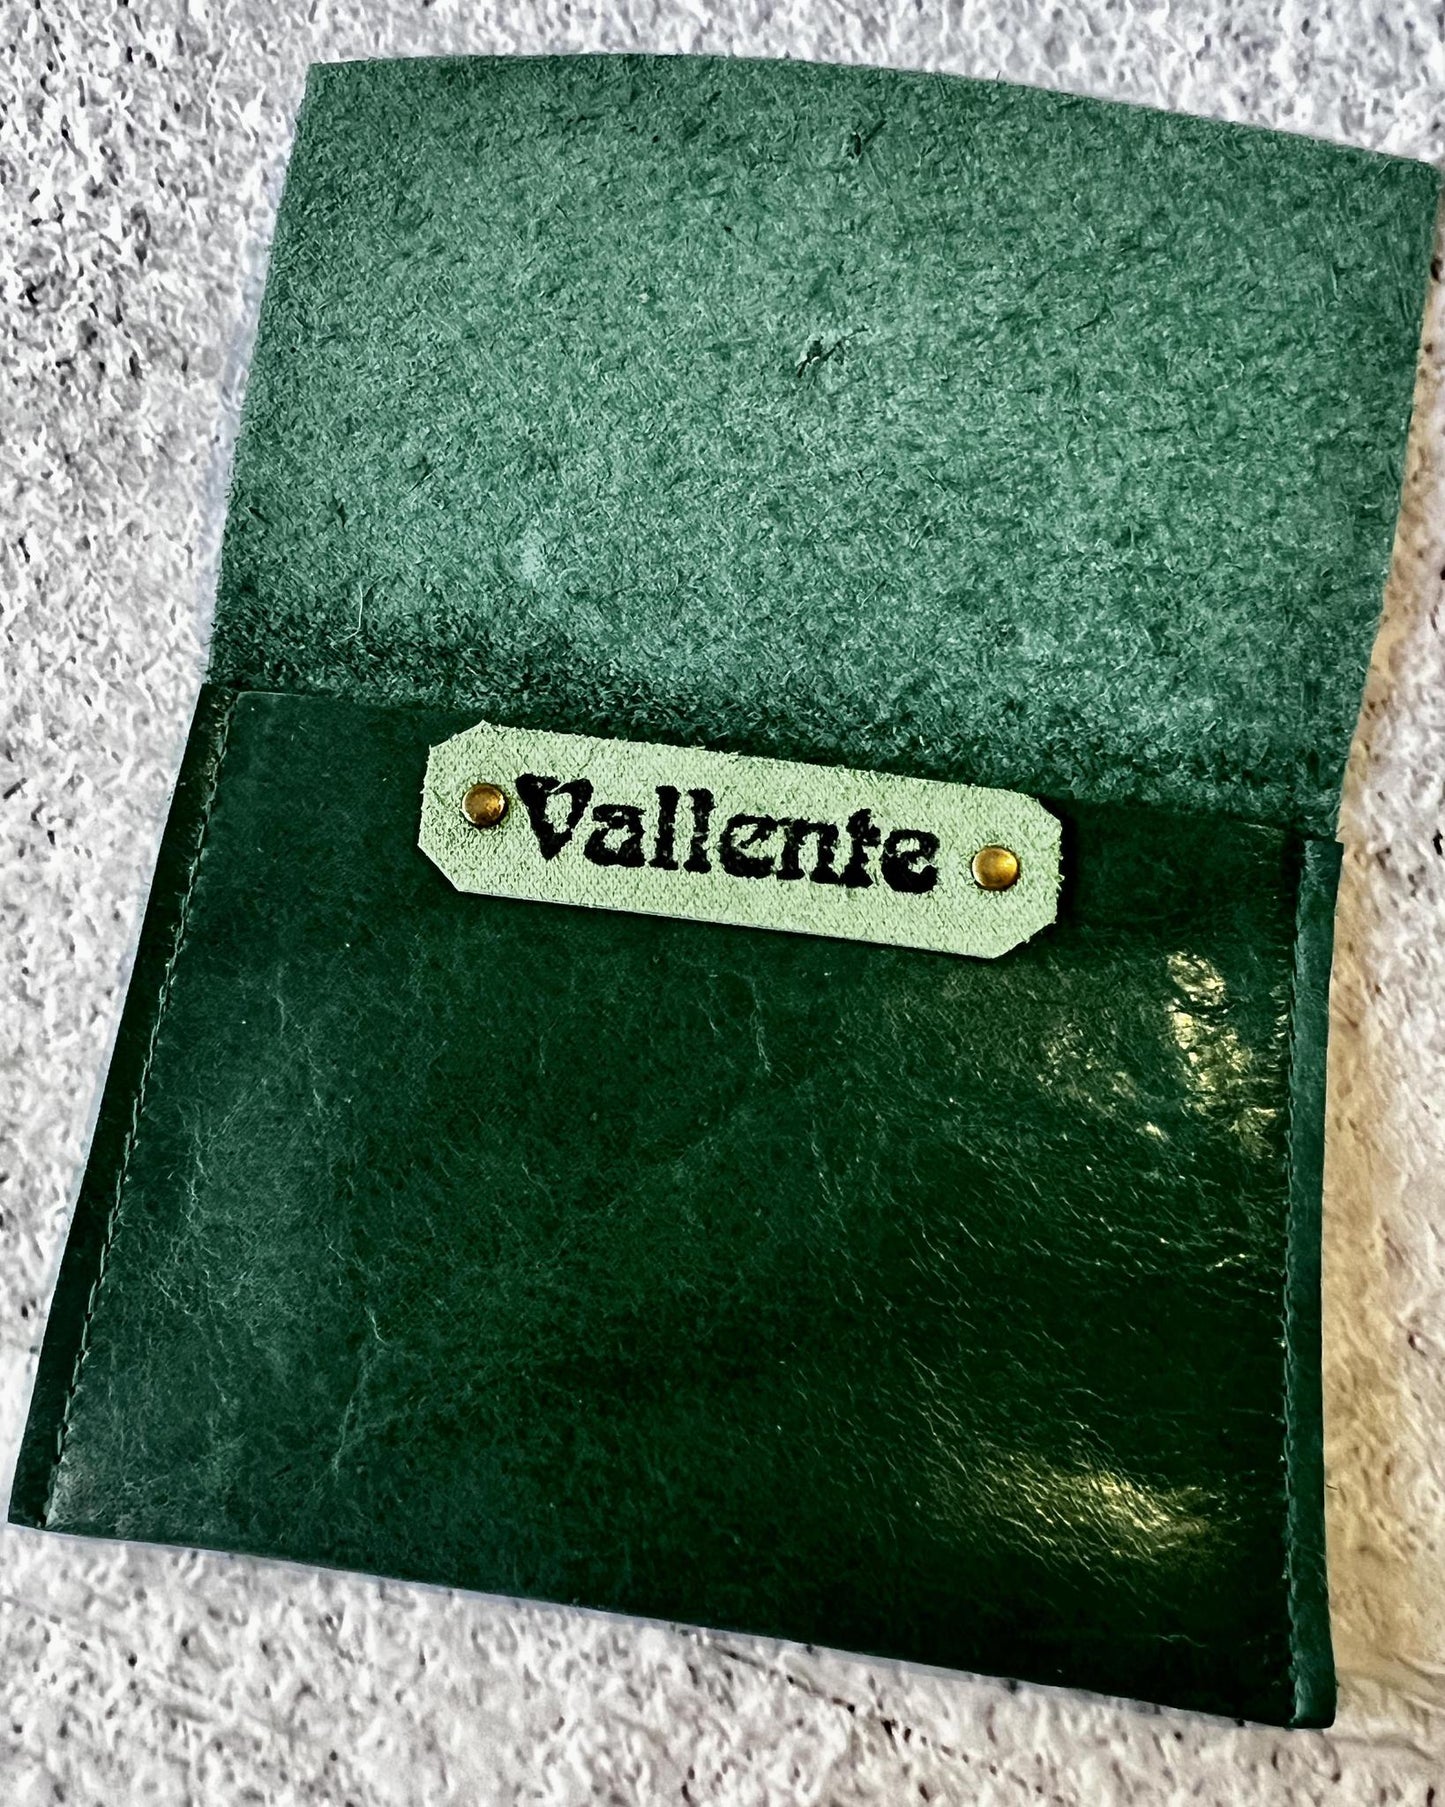 Vallente Leather Lil' Stamped Wallet Kelly Green with Bunny